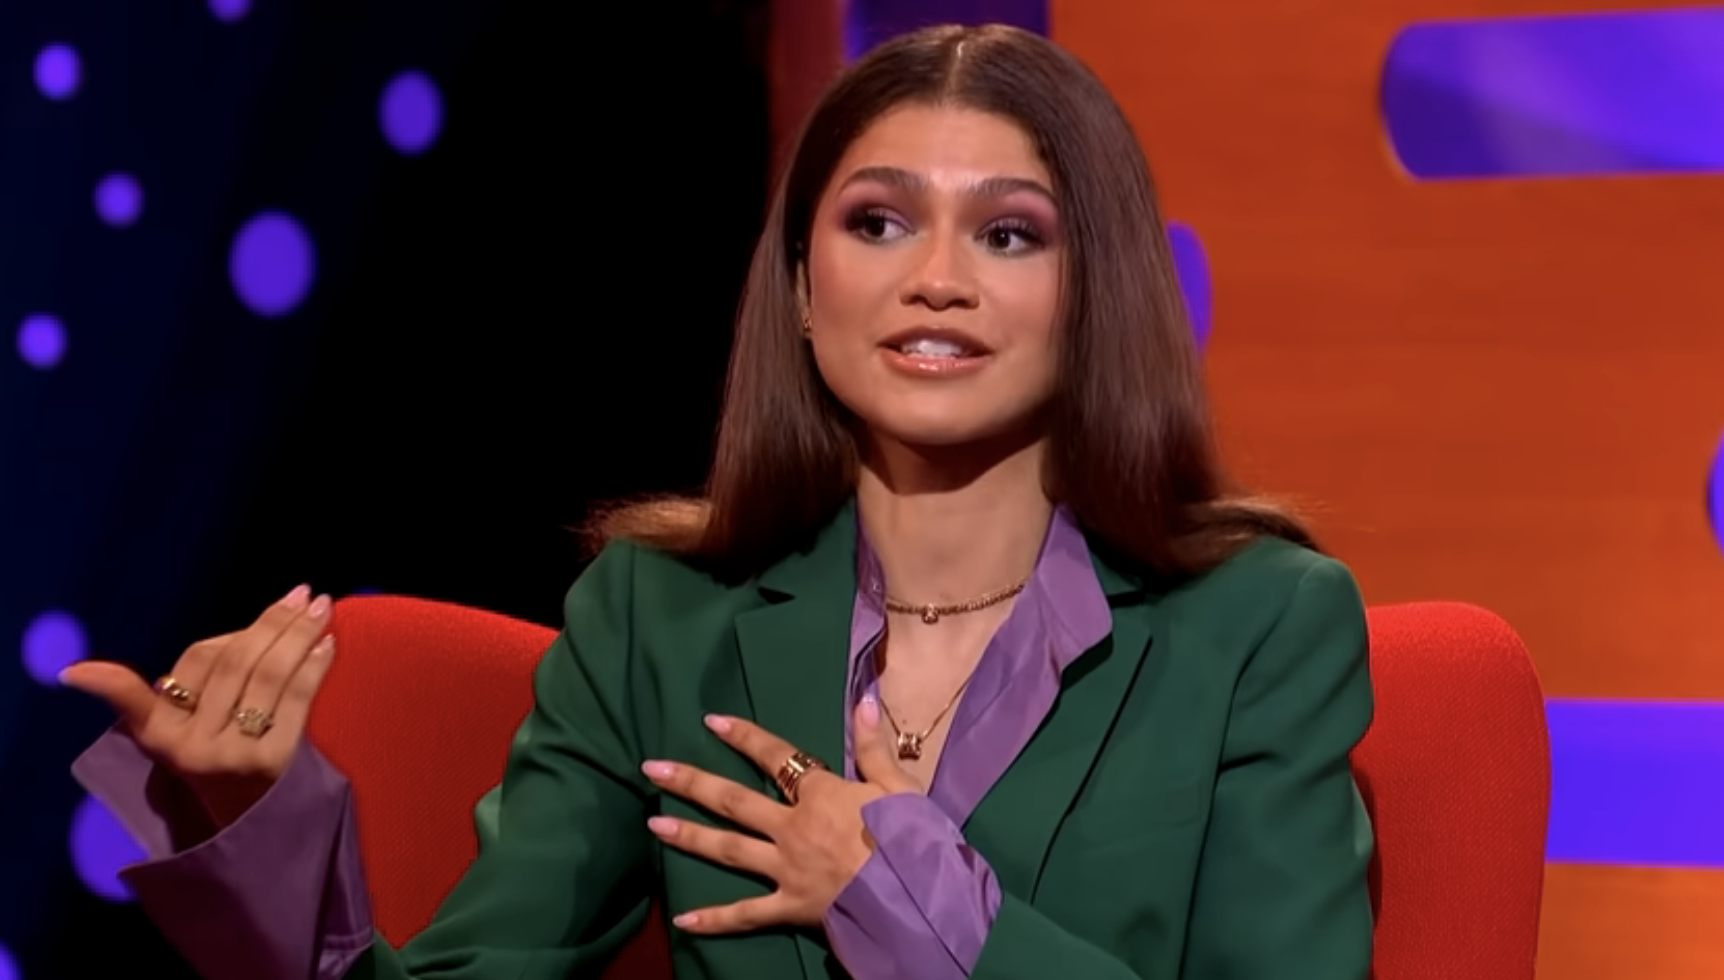 Zendaya gestures while speaking, wearing a green blazer and purple blouse, seated on a talk show set